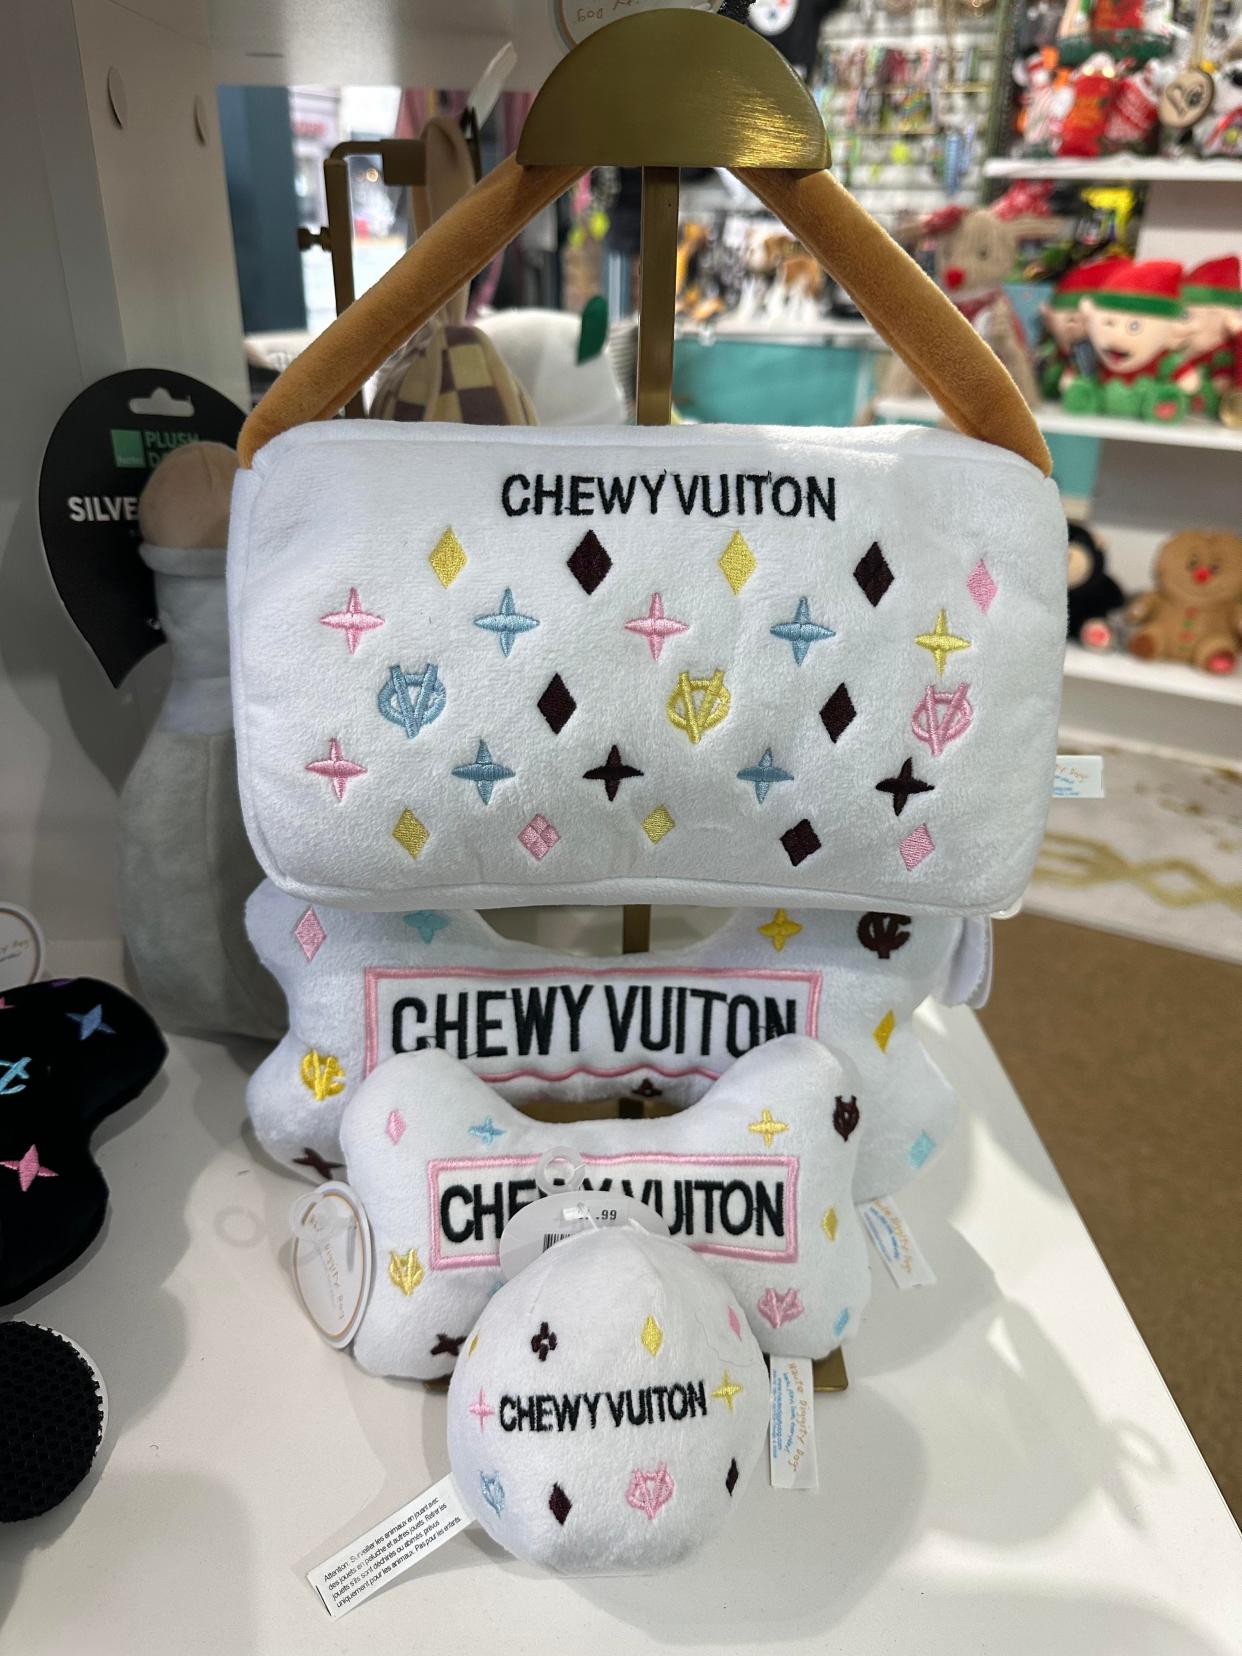 The Chewy Vuiton collection of dog toys at Wags on 3rd in Beaver.